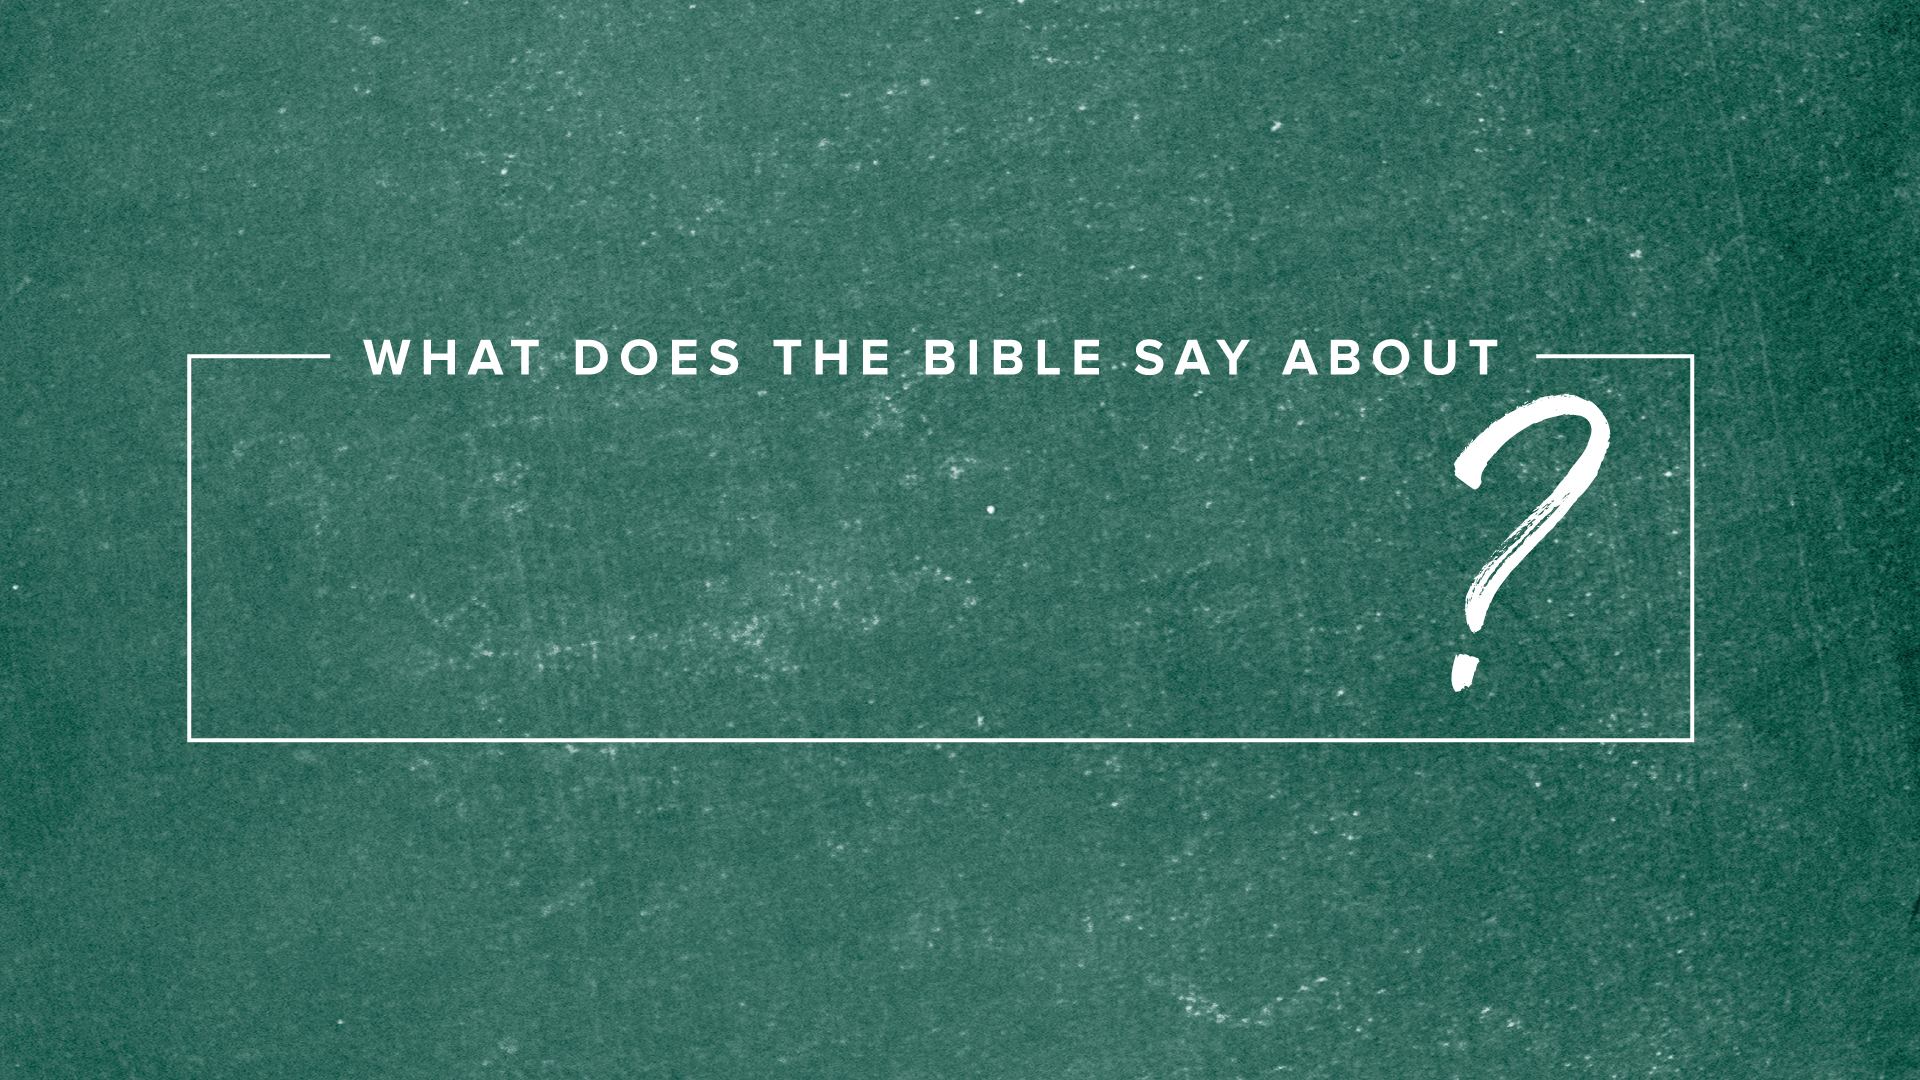 What does The Bible Say About ___? Care for the Earth